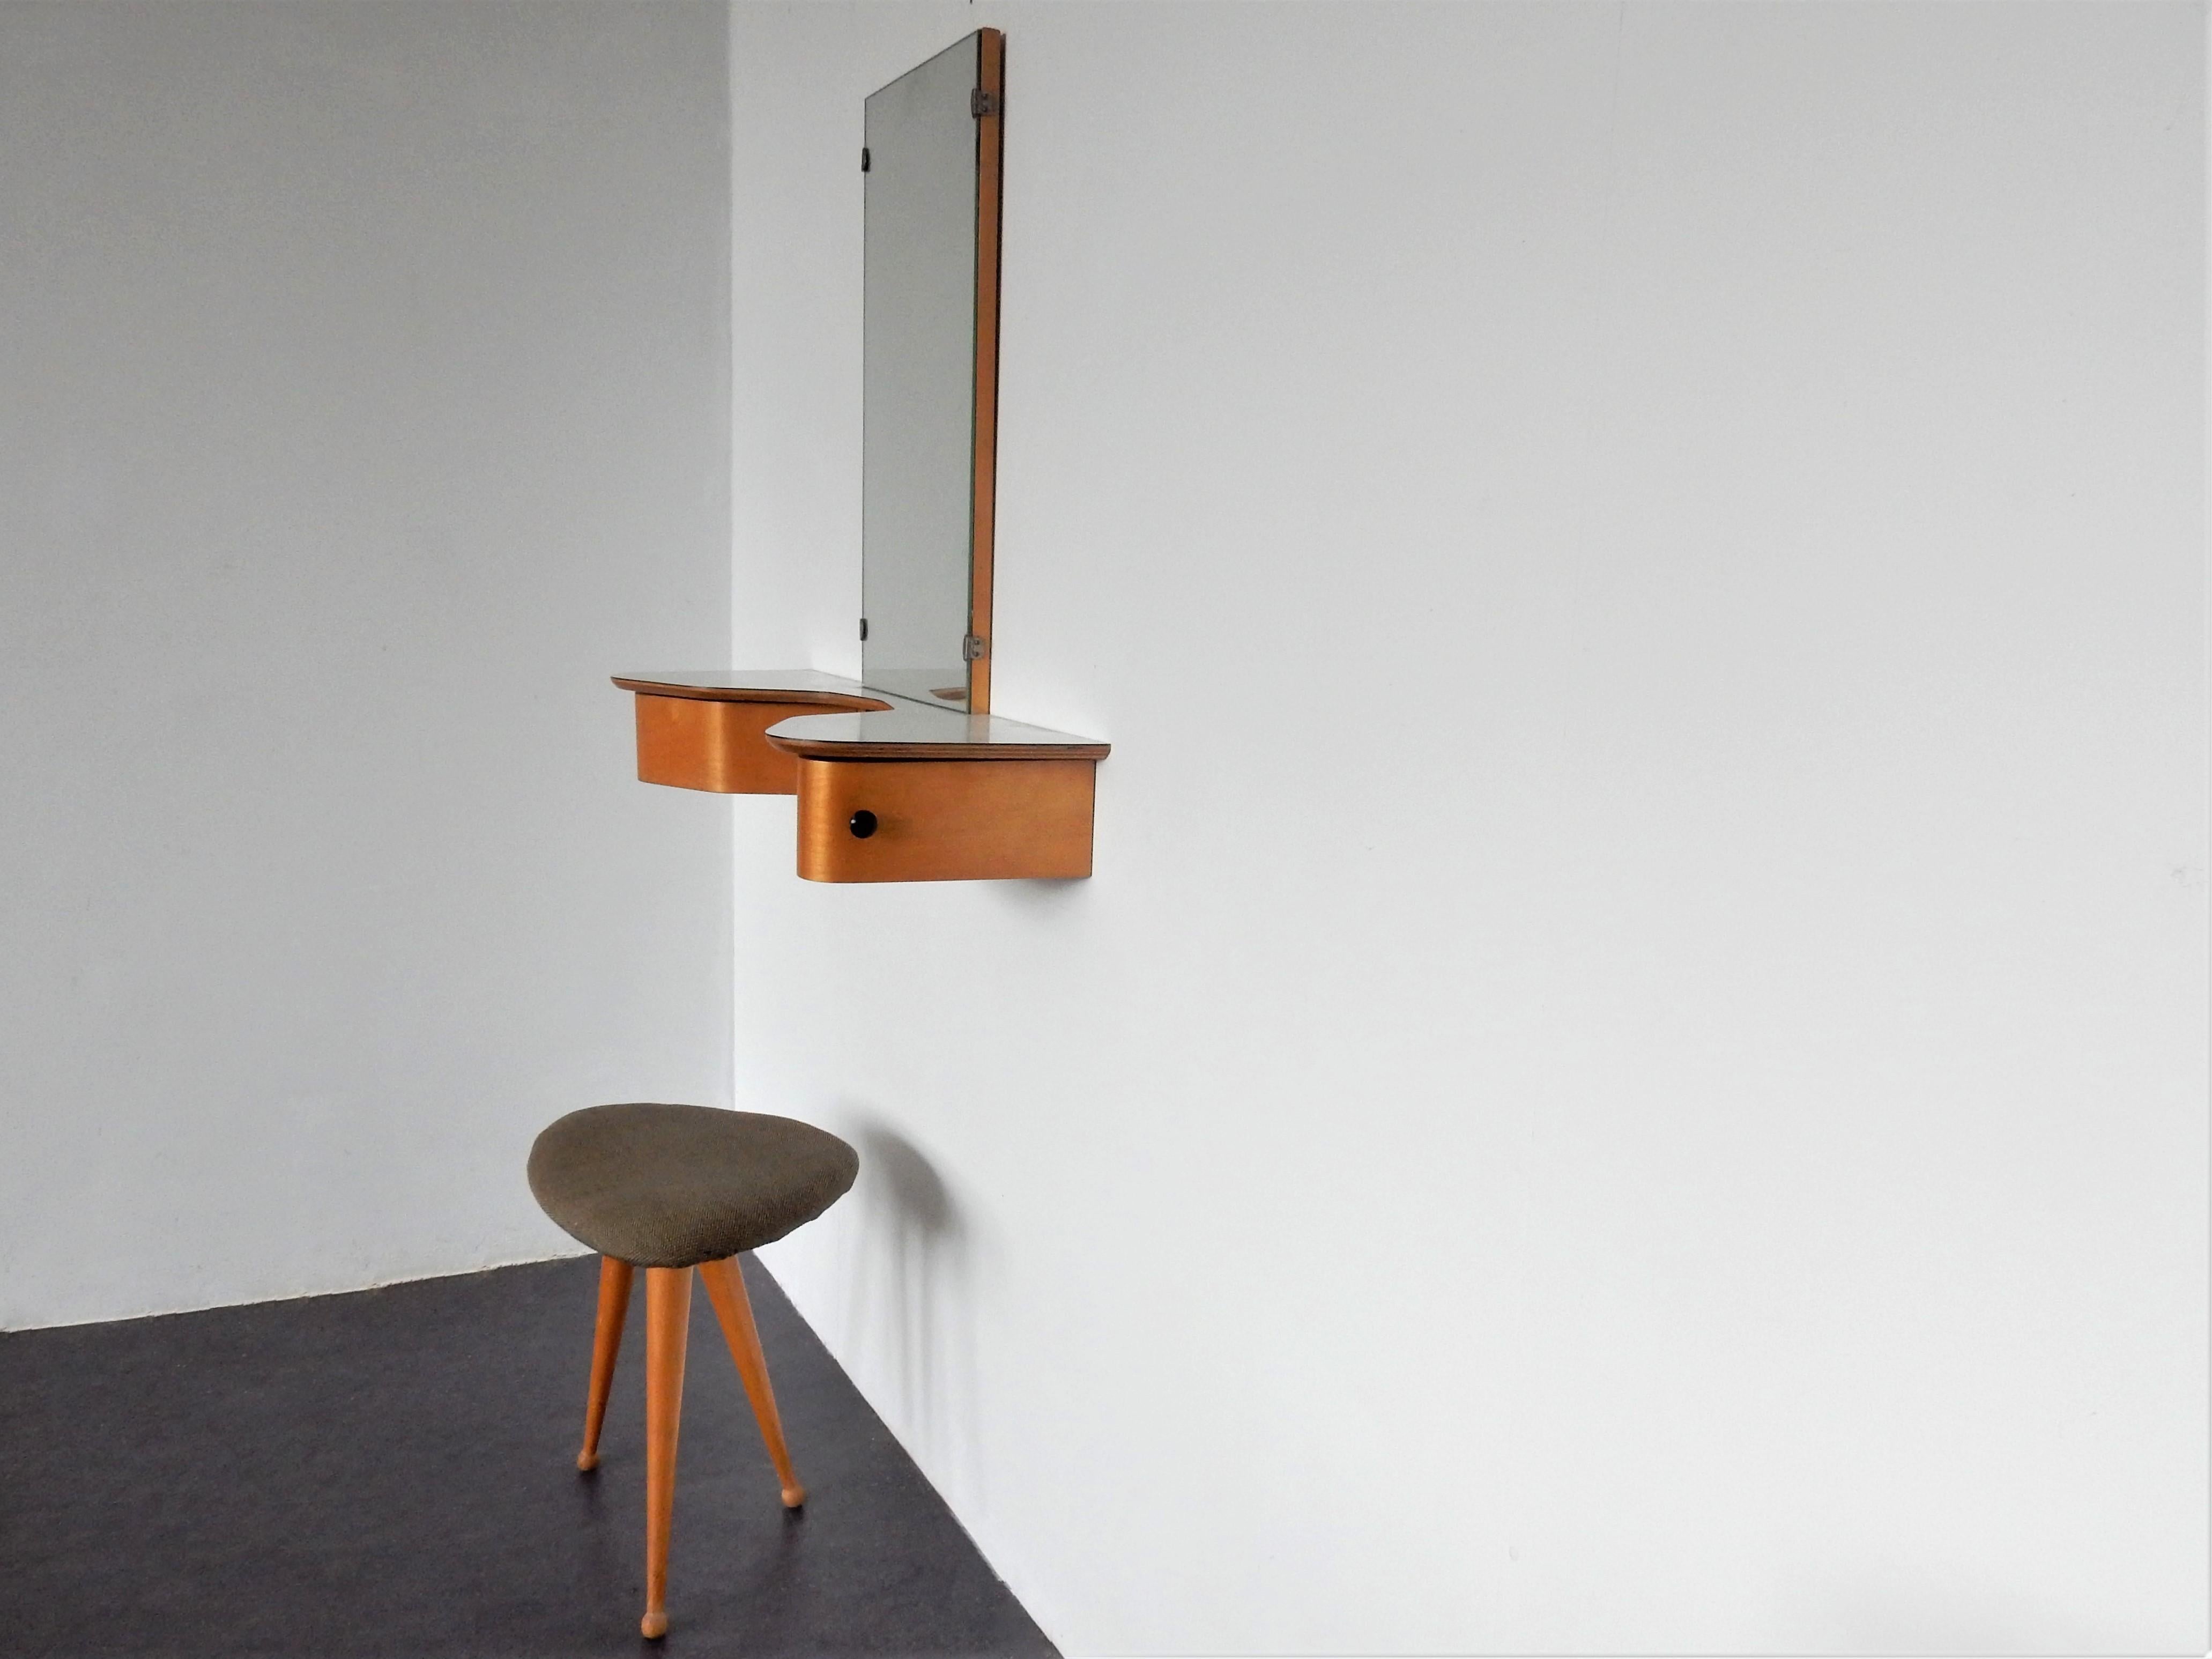 A beautiful dressing table, model EB05, witch original matching stool was designed by Cees Braakman for Pastoe in the 1950s. This wall mounted item is part of the birch series. This specific one is in a very nice condition with minor signs of age